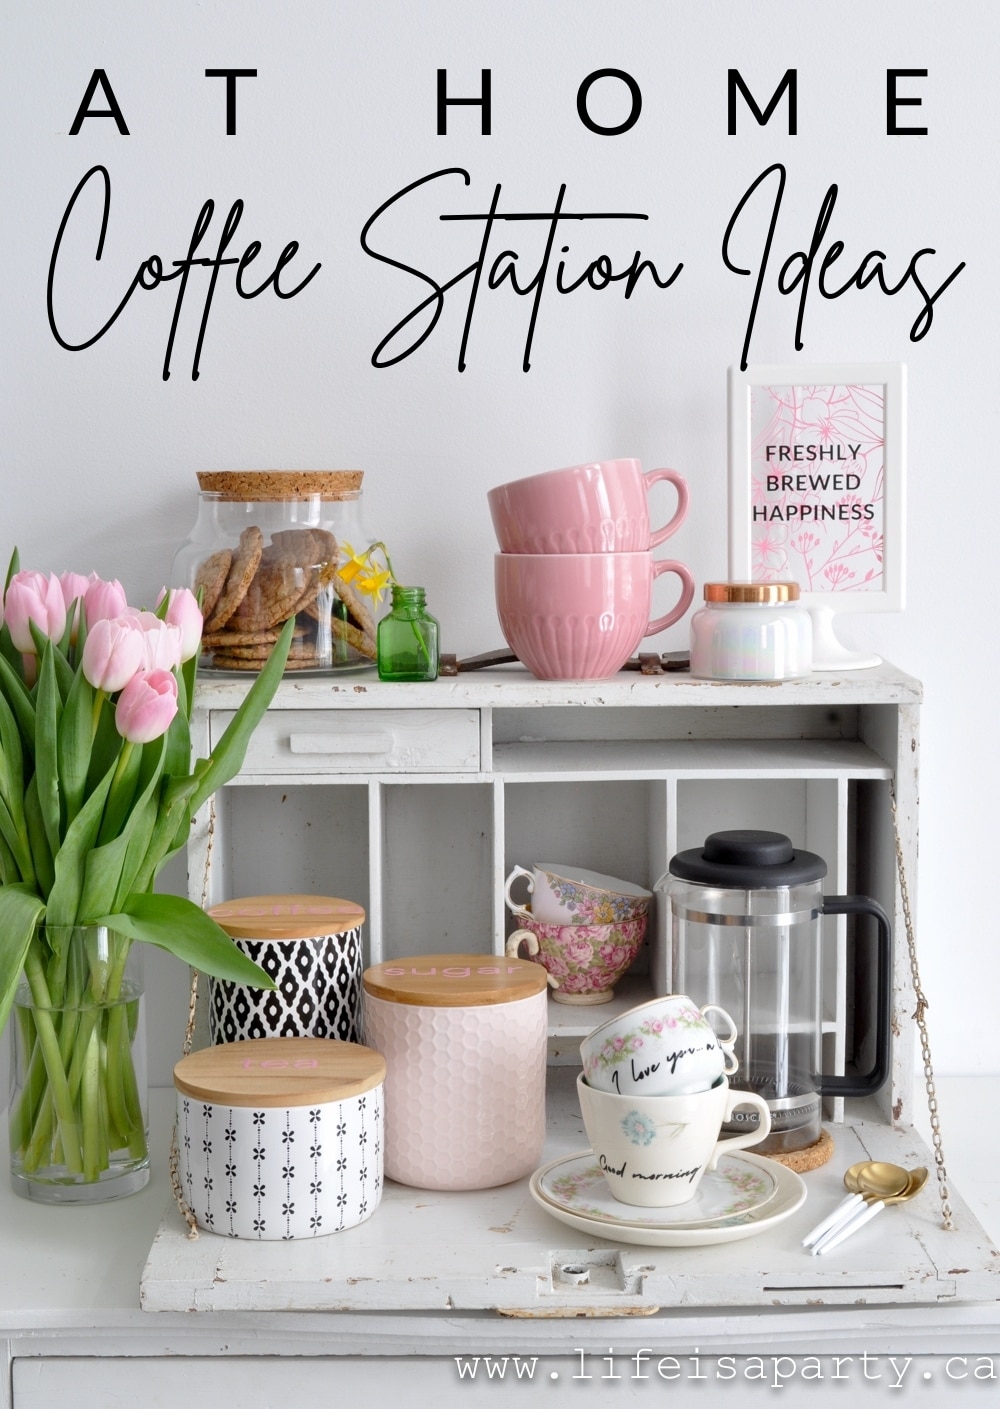 Home Coffee Station Ideas: set up a special spot at home for everything you need to make the perfect coffee -or tea!